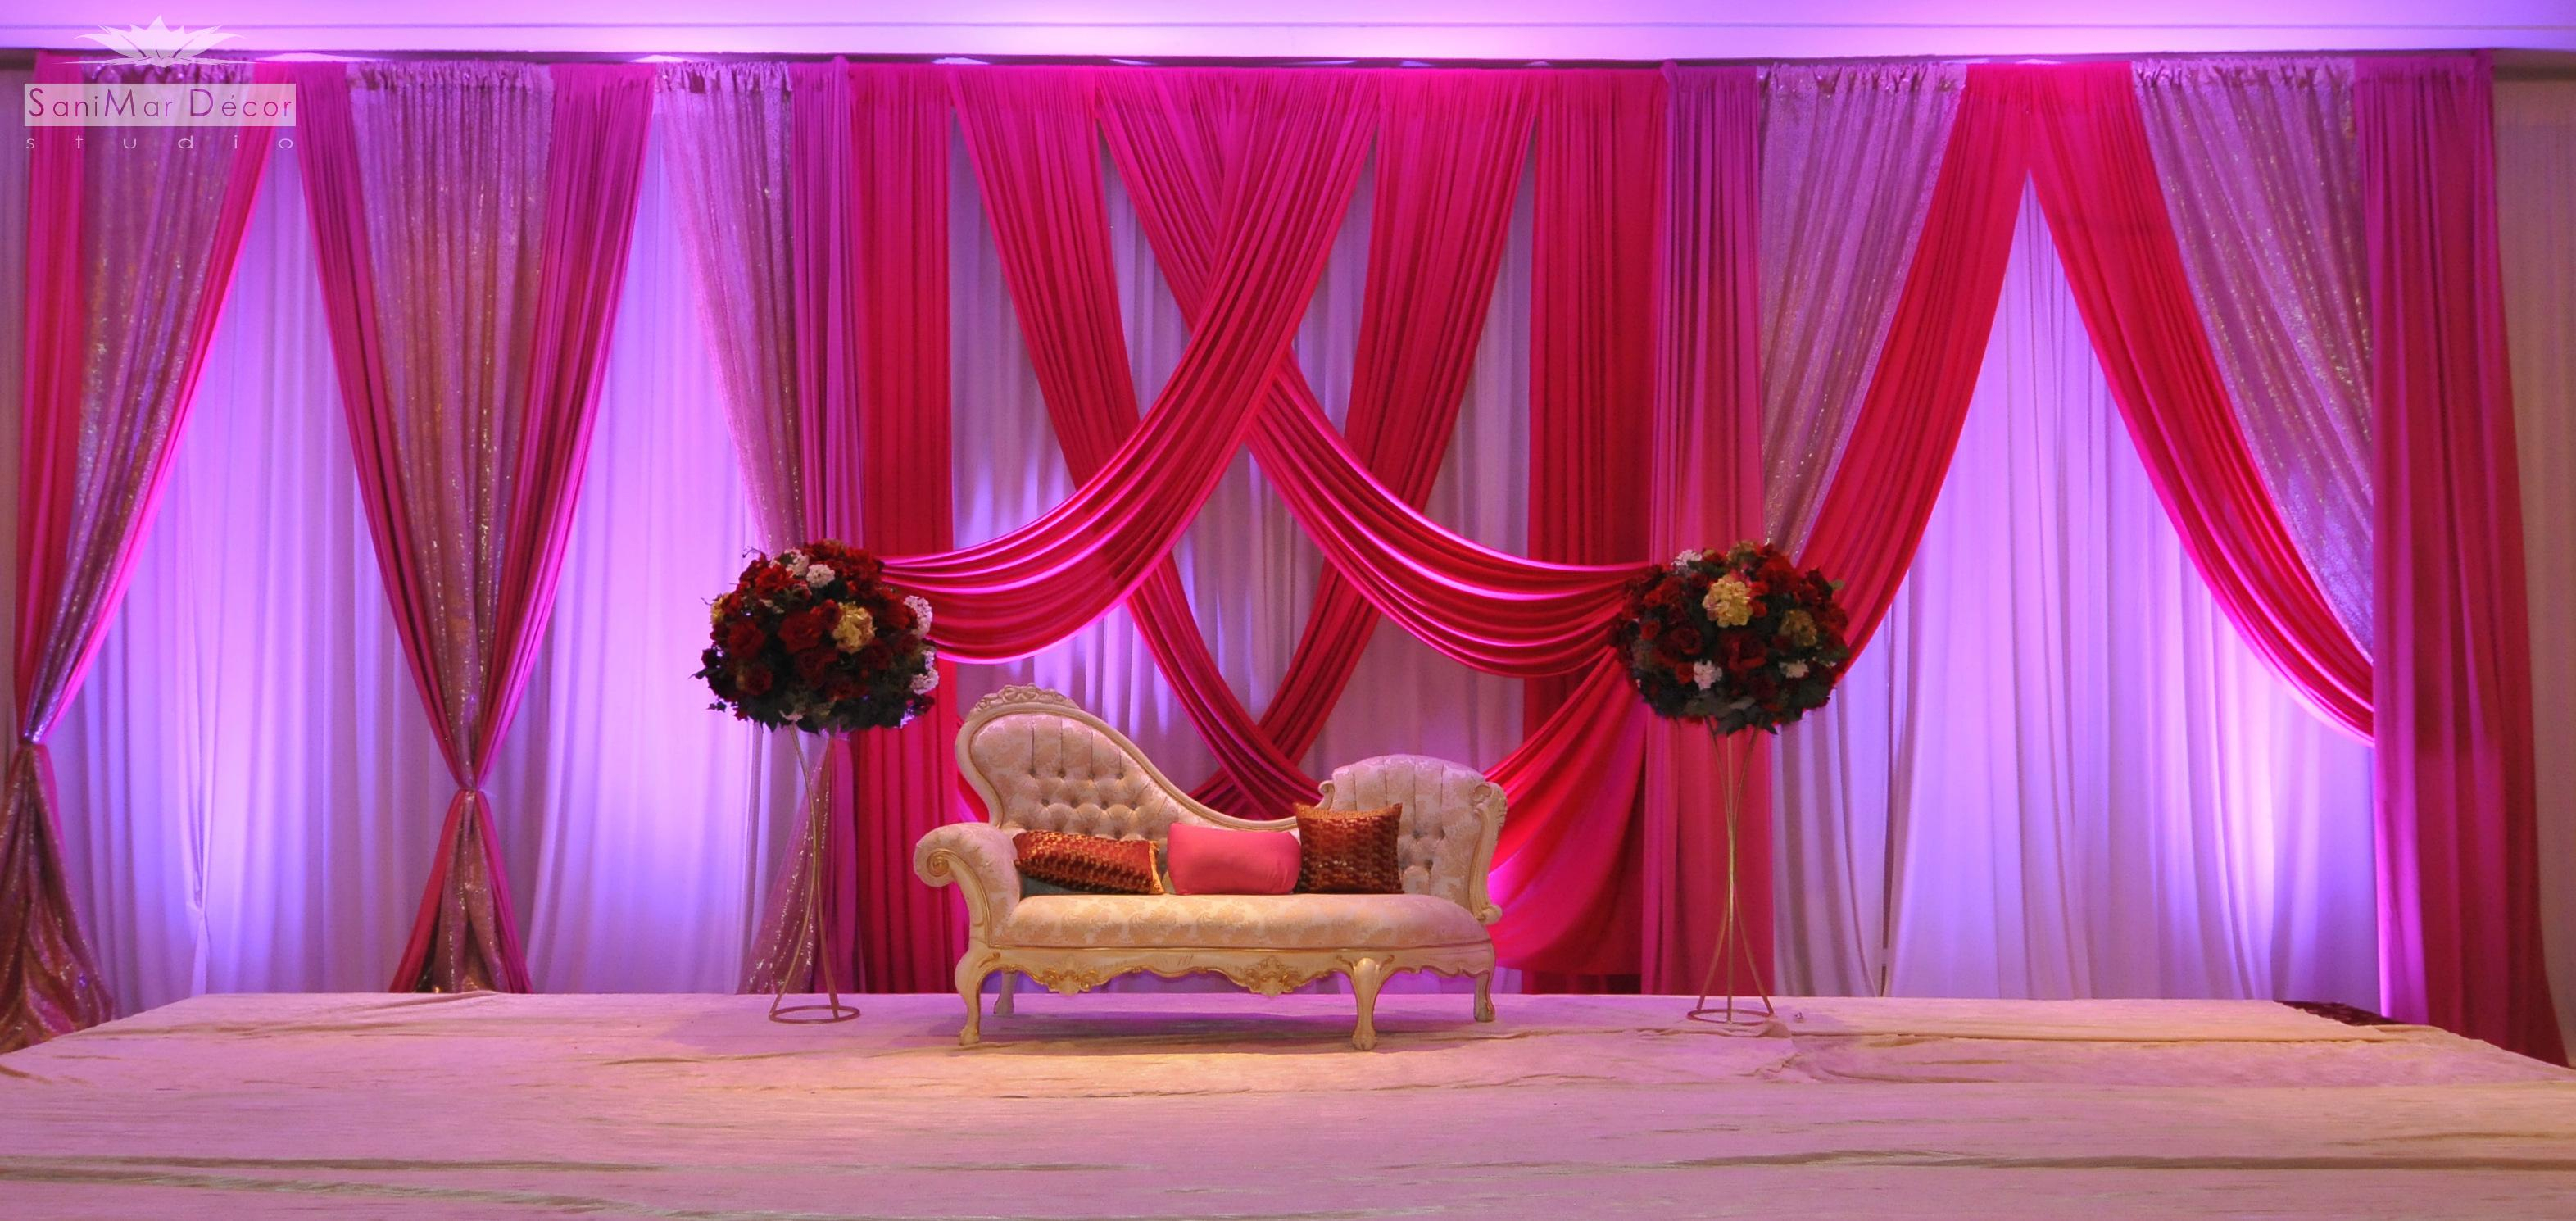 Simple Wed Gallery Of Art Wedding Stage Decoration Ideas - Small ...